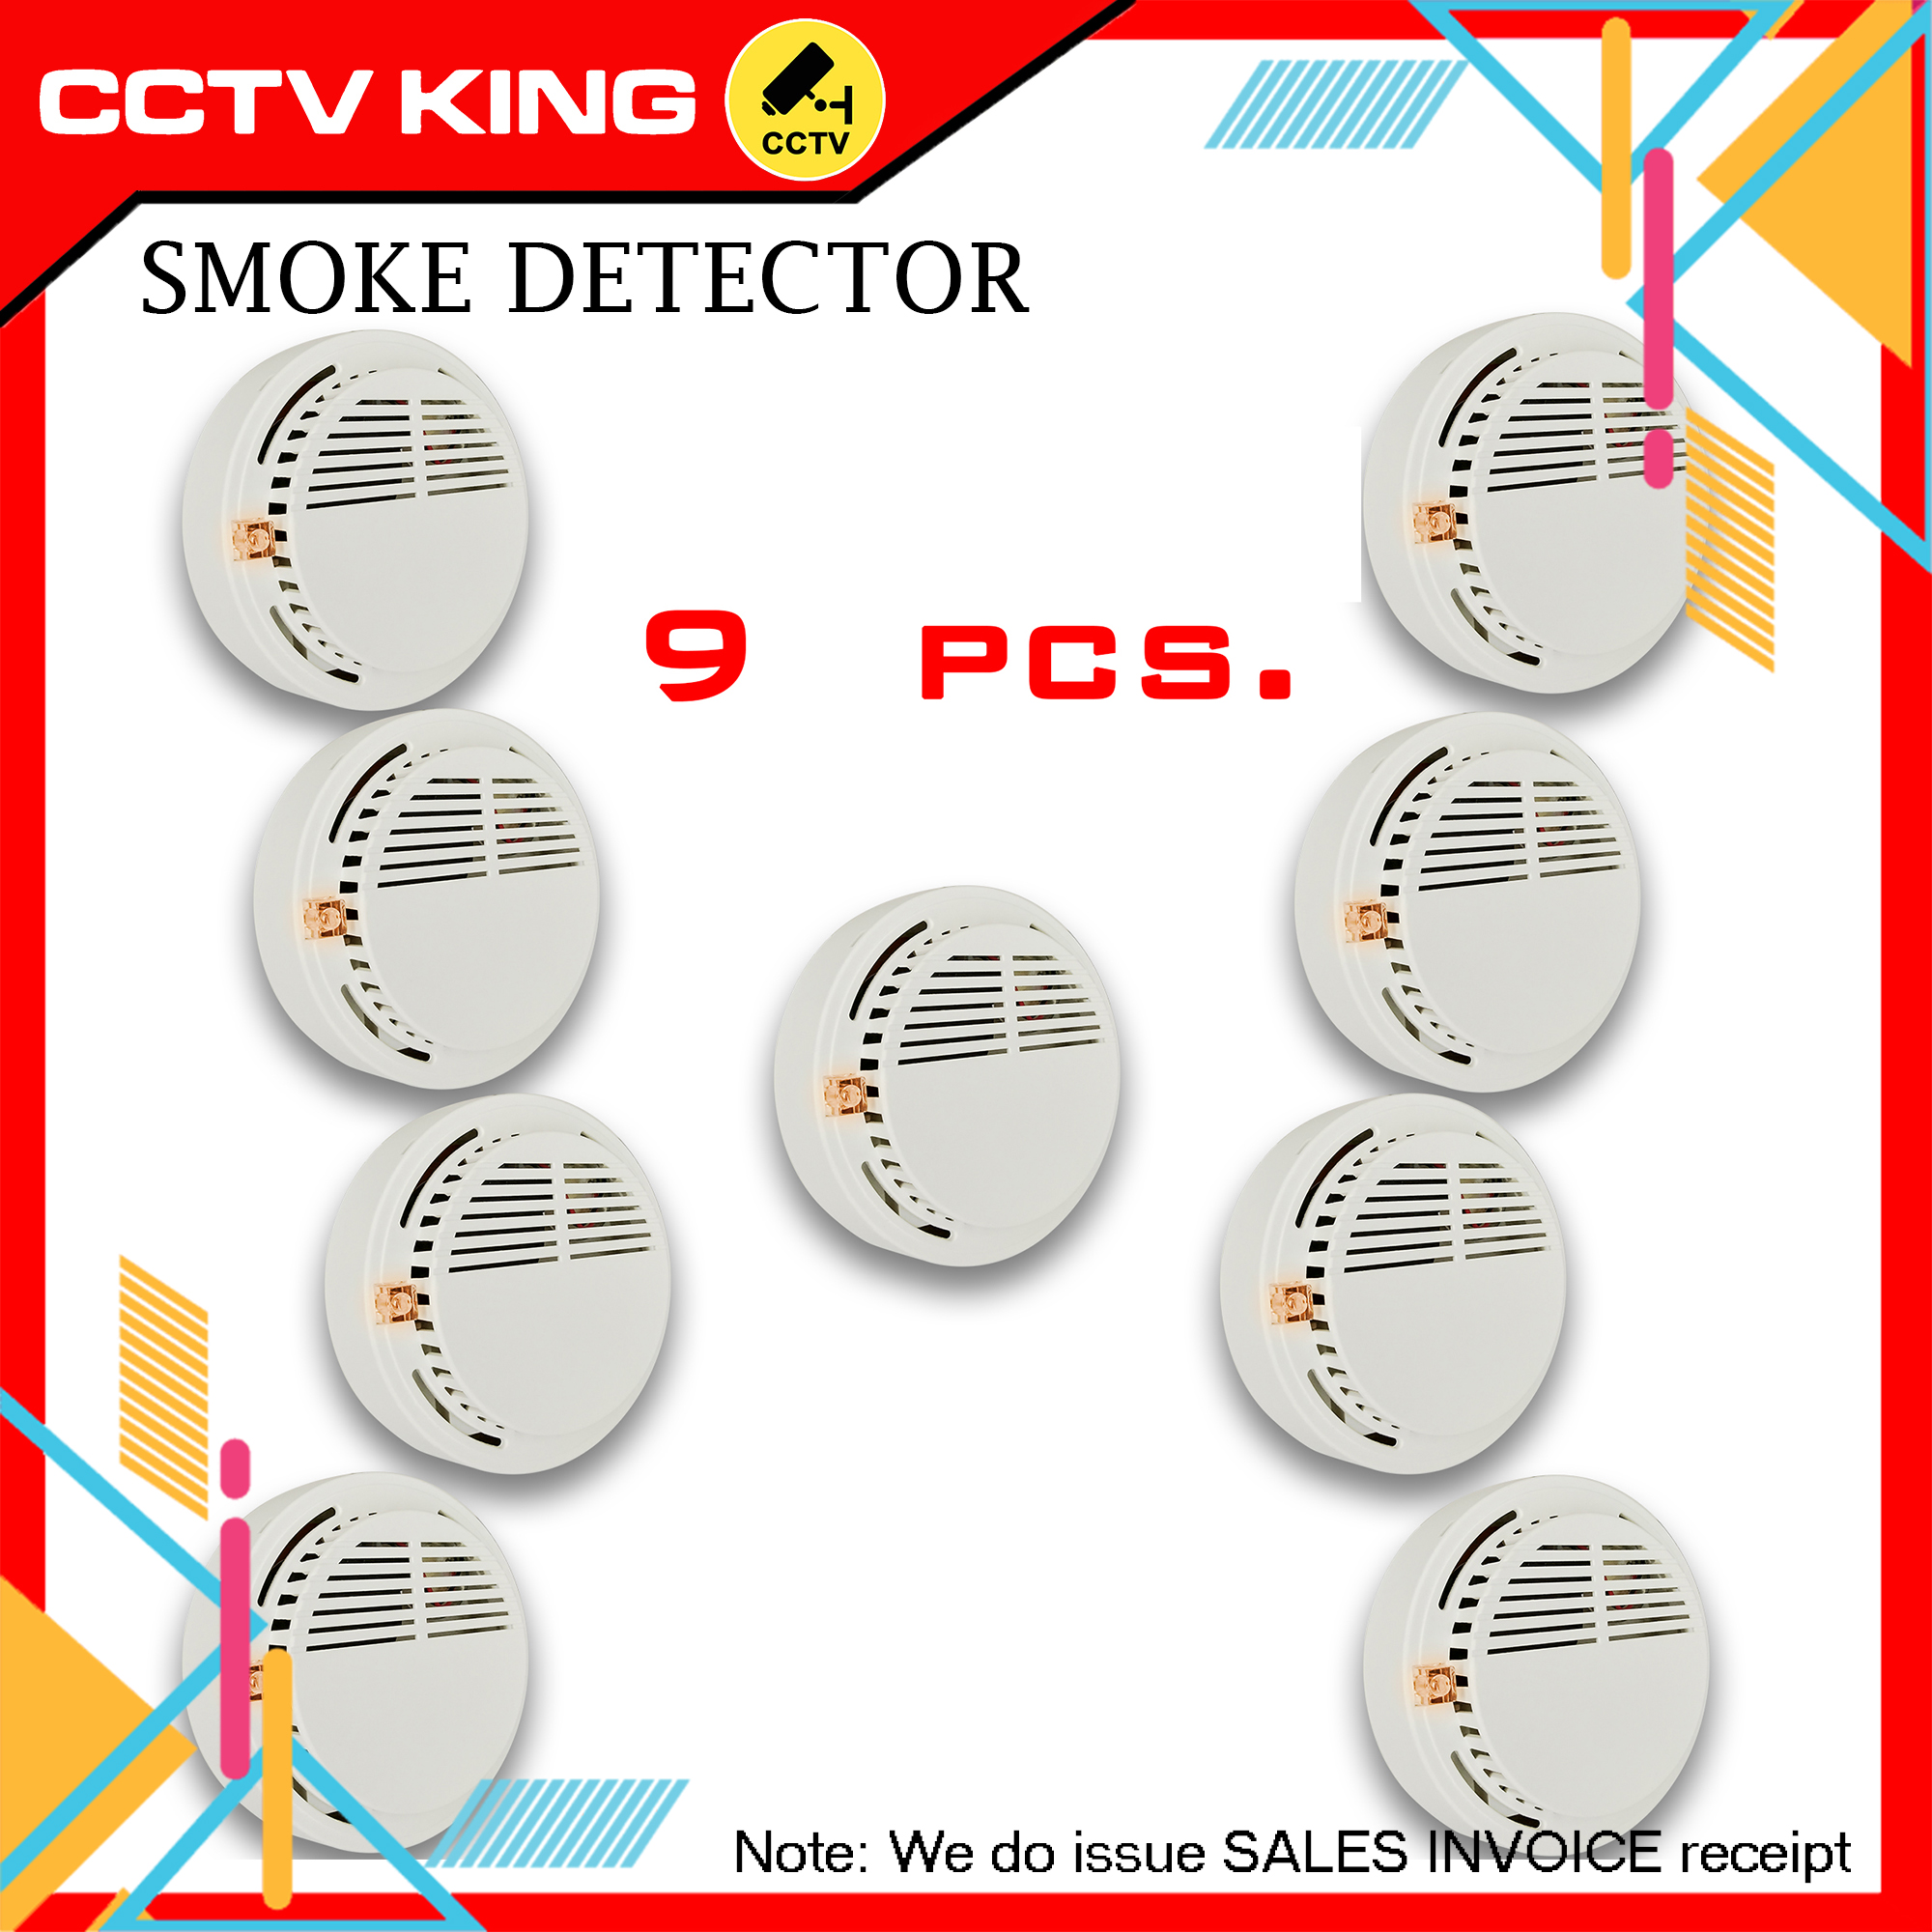 Wireless Smoke Detector - Brand Name (if applicable)